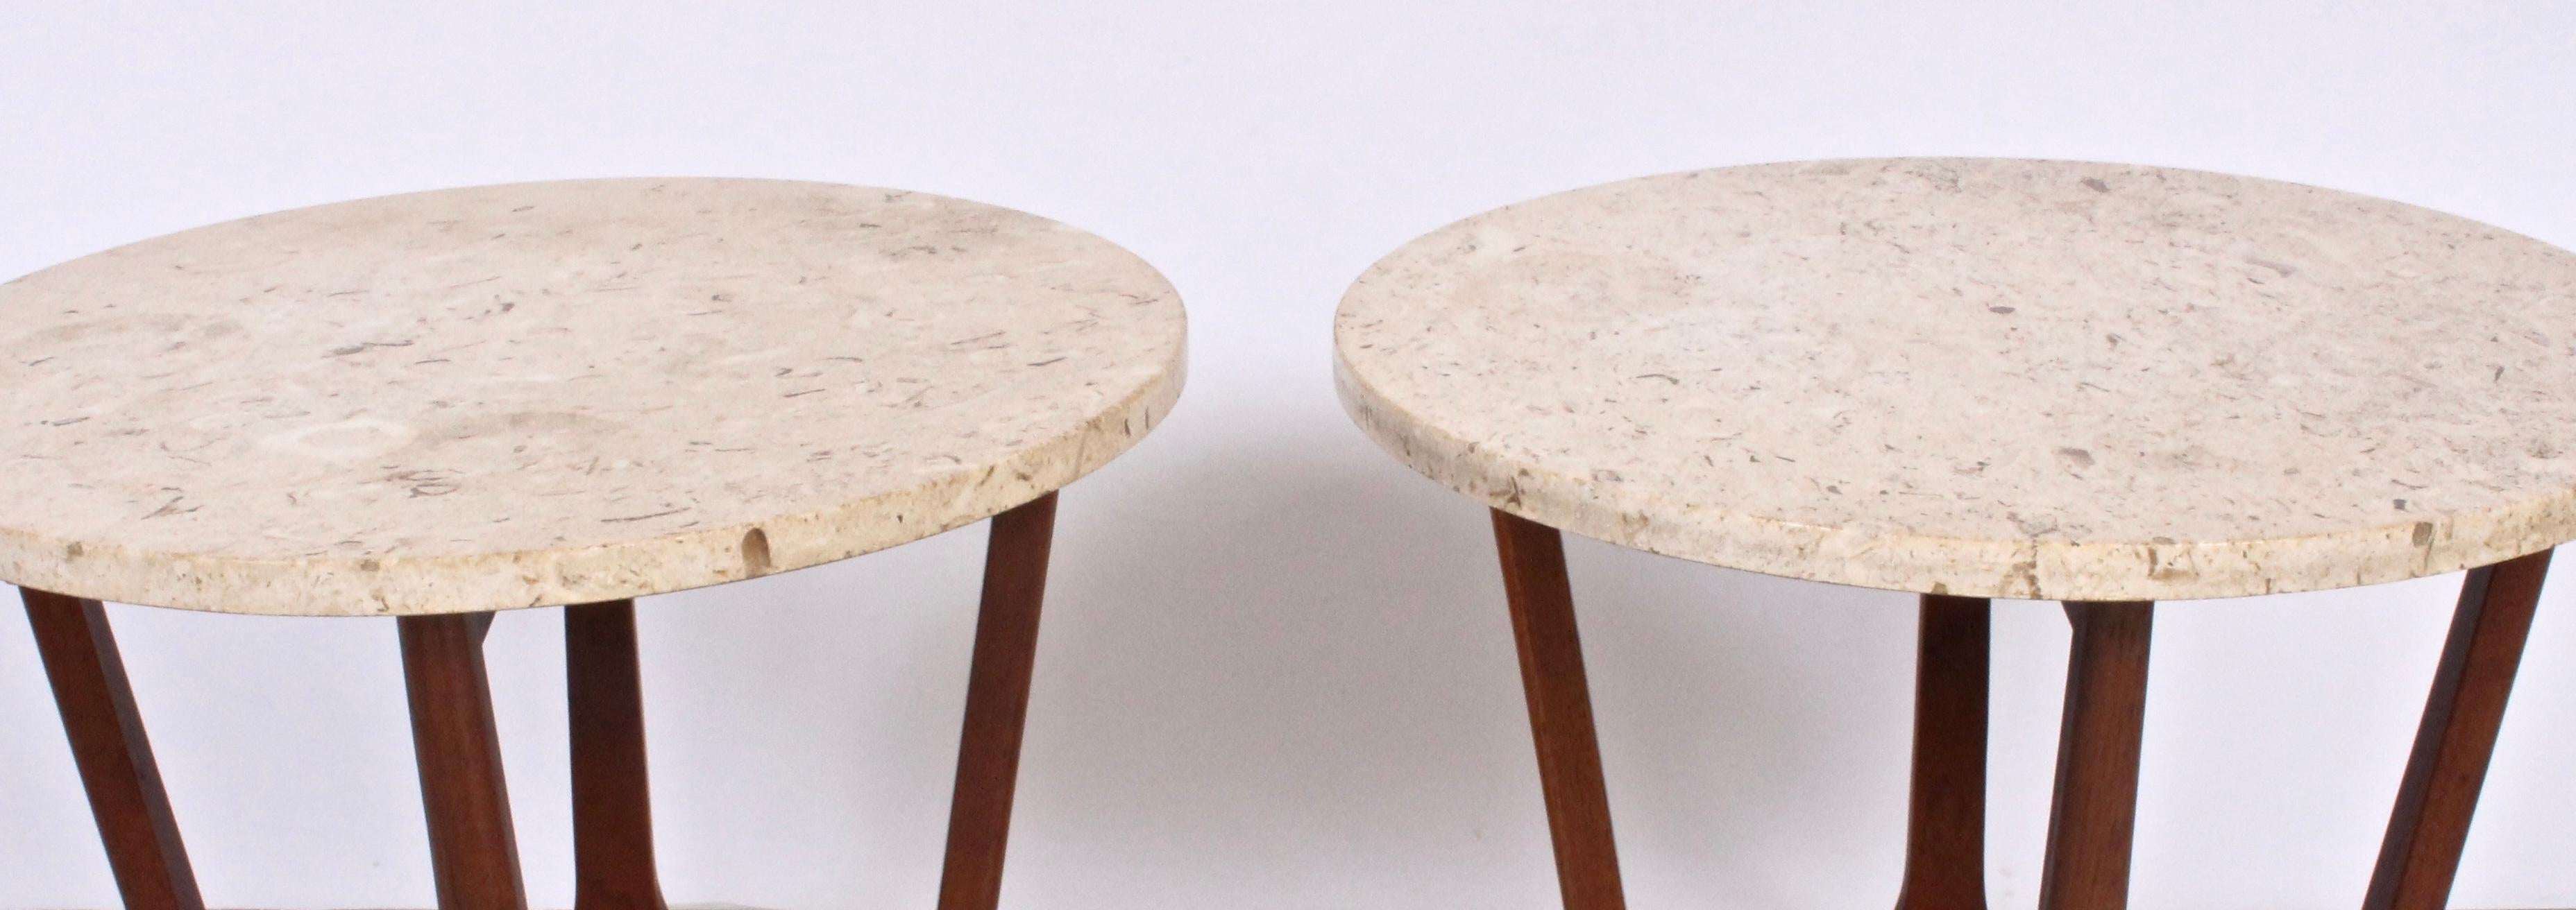 Pair of lane furniture walnut and Italian travertine marble side tables - Side by side coffee tables, circa 1960. Round travertine rests on open sturdy dark walnut framework. Tops easily removable for transport. With original metal floor glides.